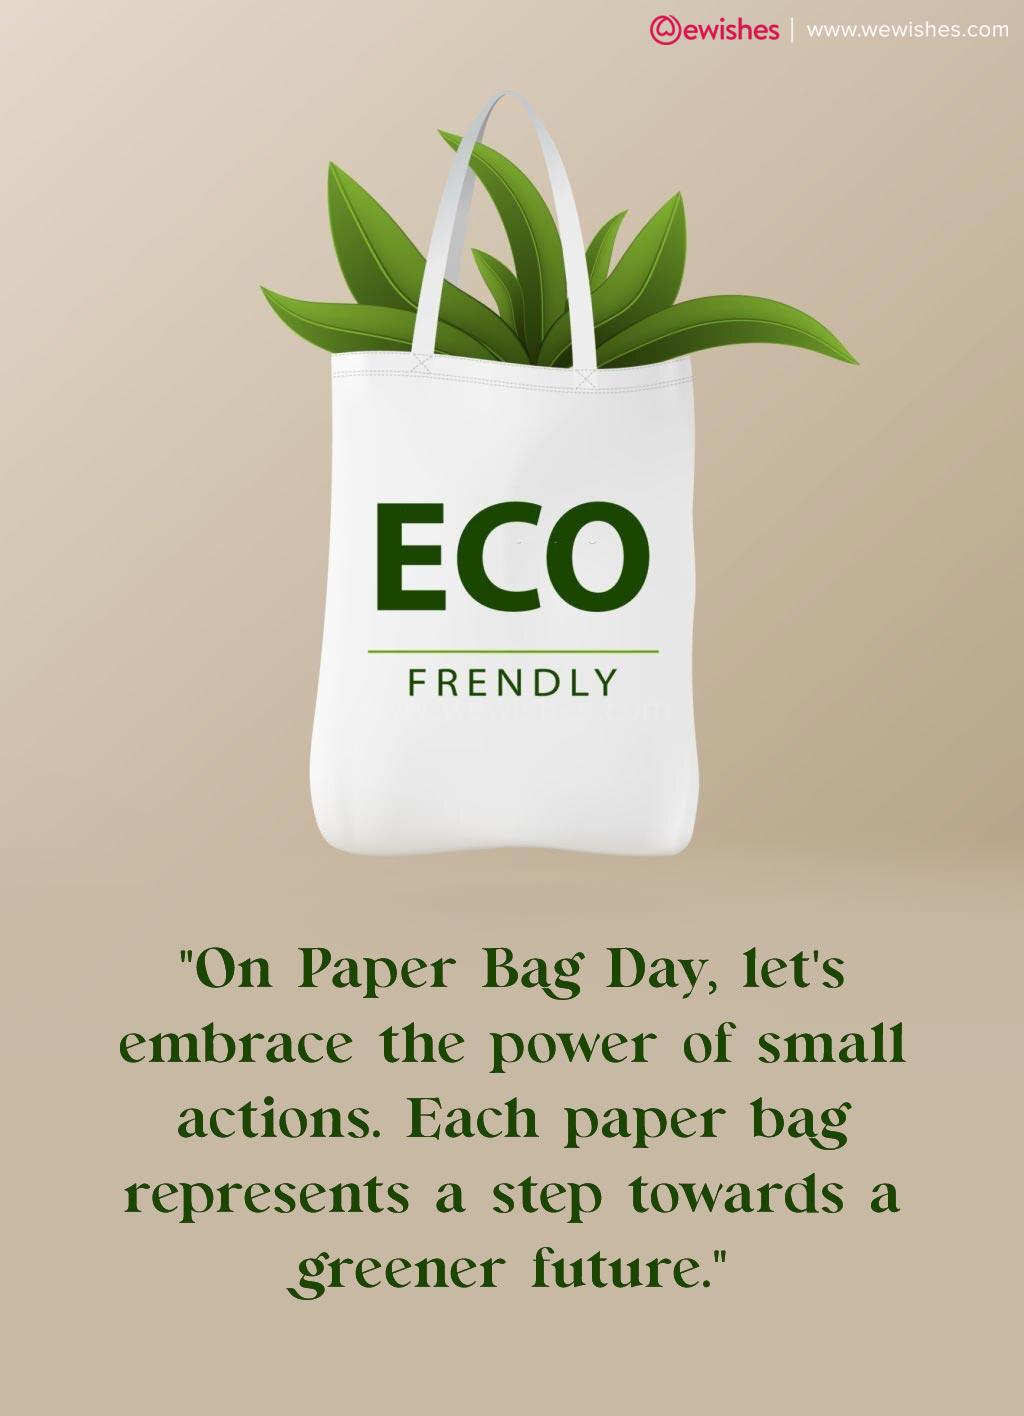 eco friendly bags quotes | Bag quotes, Eco friendly bags, Non woven bags